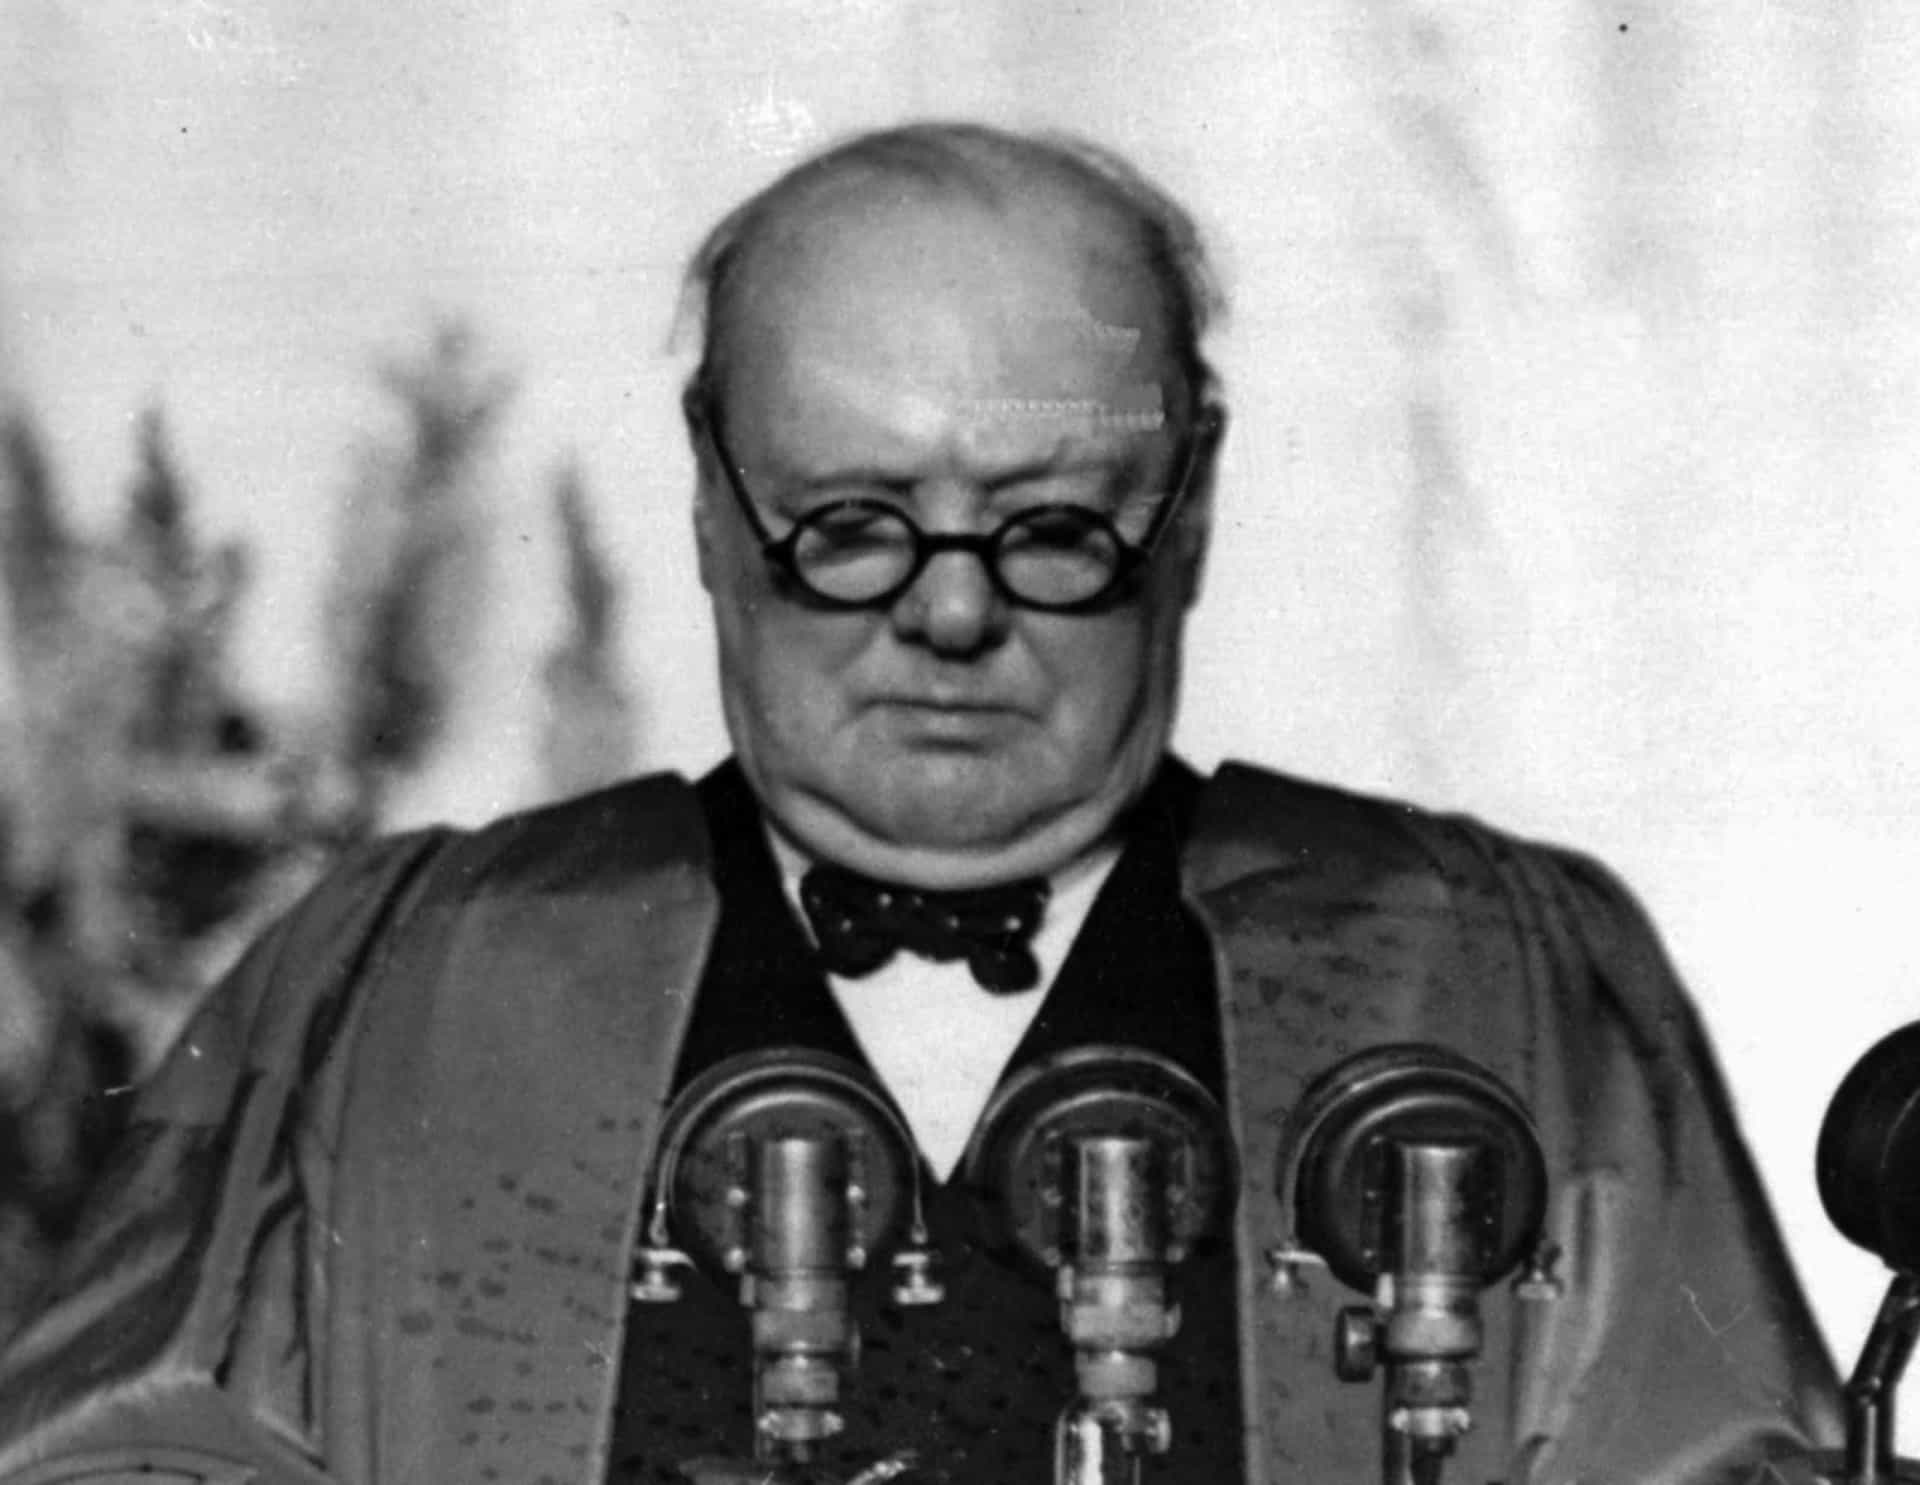 <p>British statesman Winston Churchill was the first person to use the term "iron curtain" during a speech in Fulton, Missouri, on March 5, 1946 (pictured). He remarked that an iron curtain had fallen across Europe, referring to new, Cold War boundaries.</p>